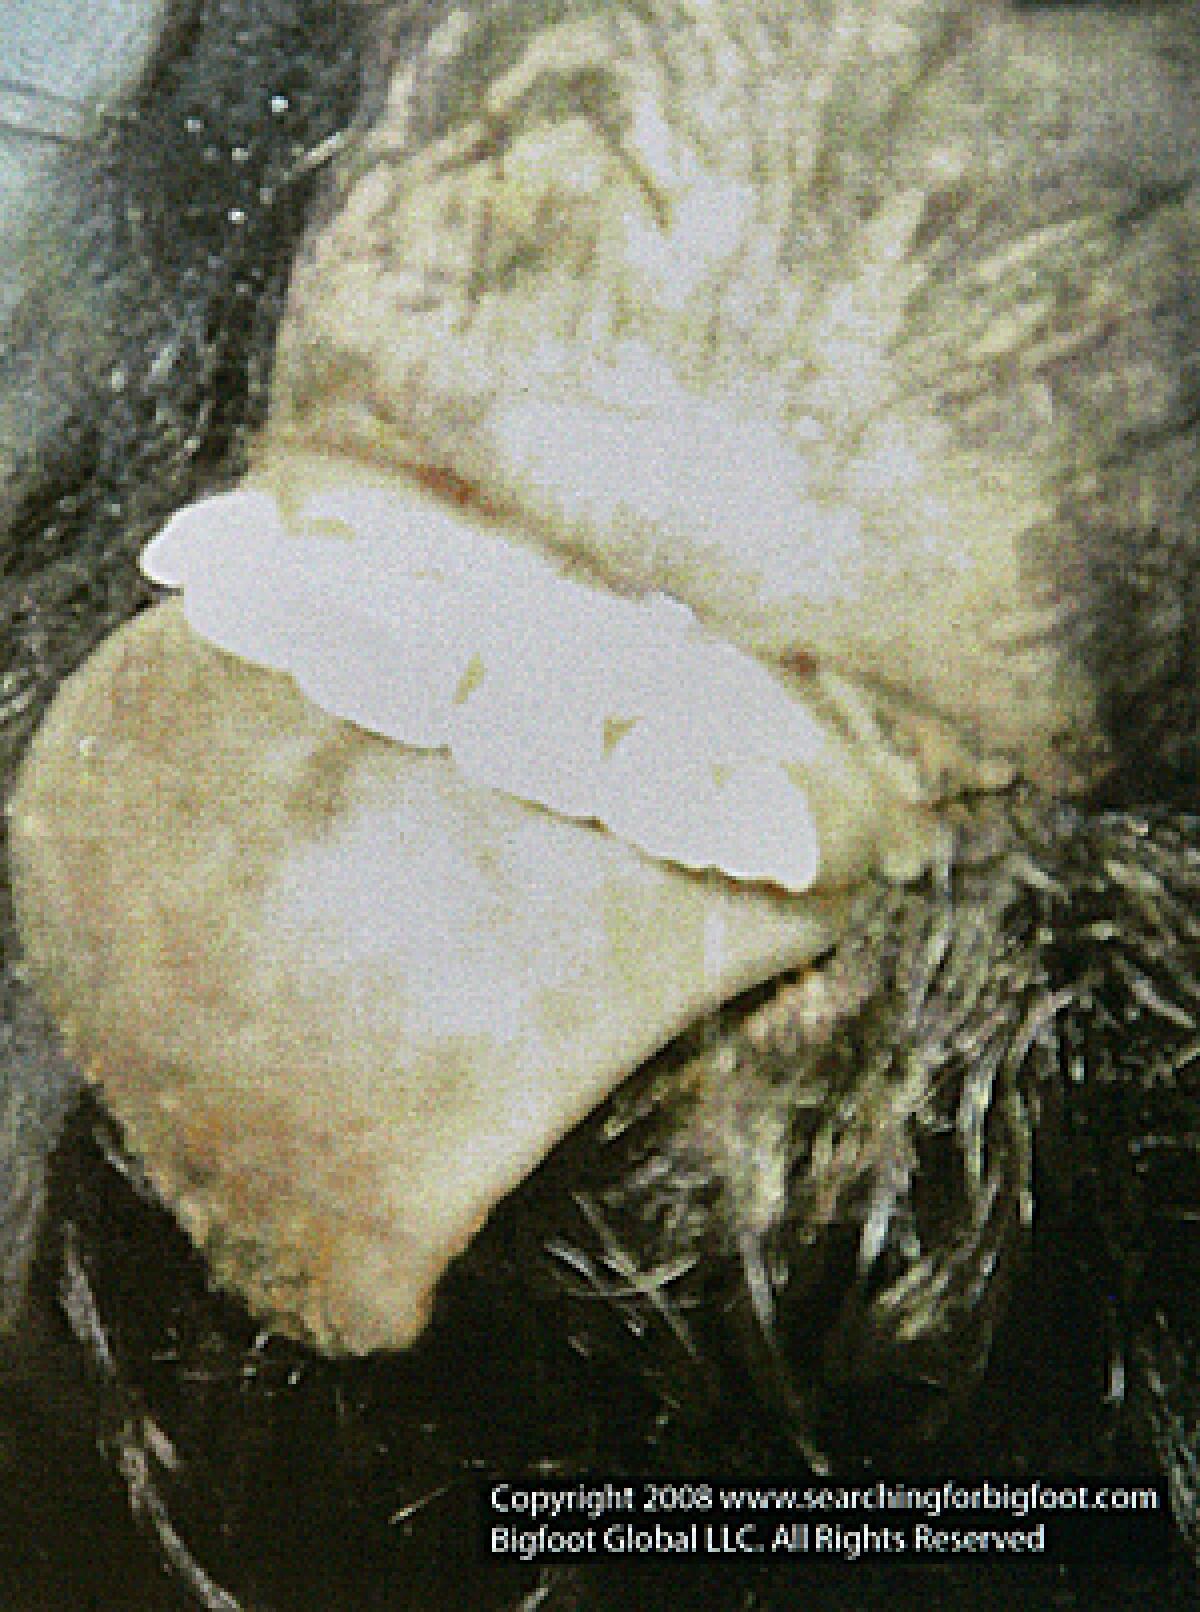 This image shows what is claimed by them to be the mouth area of a deceased bigfoot or sasquatch creature.